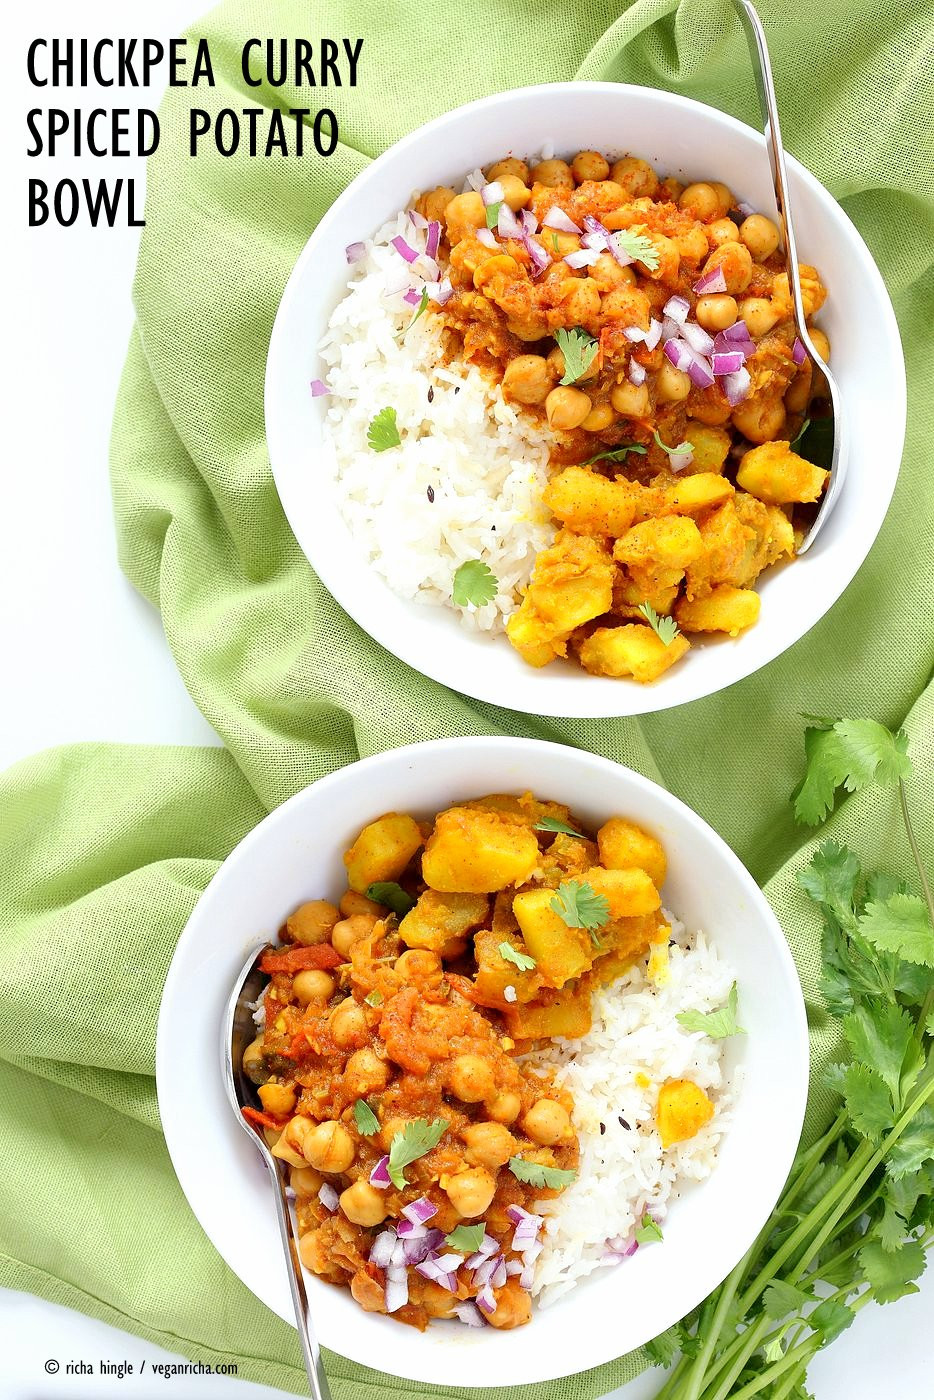 Chick Pea Vegetarian Recipes
 Easy Chickpea Curry and Spiced Potato Bowl Vegan Richa